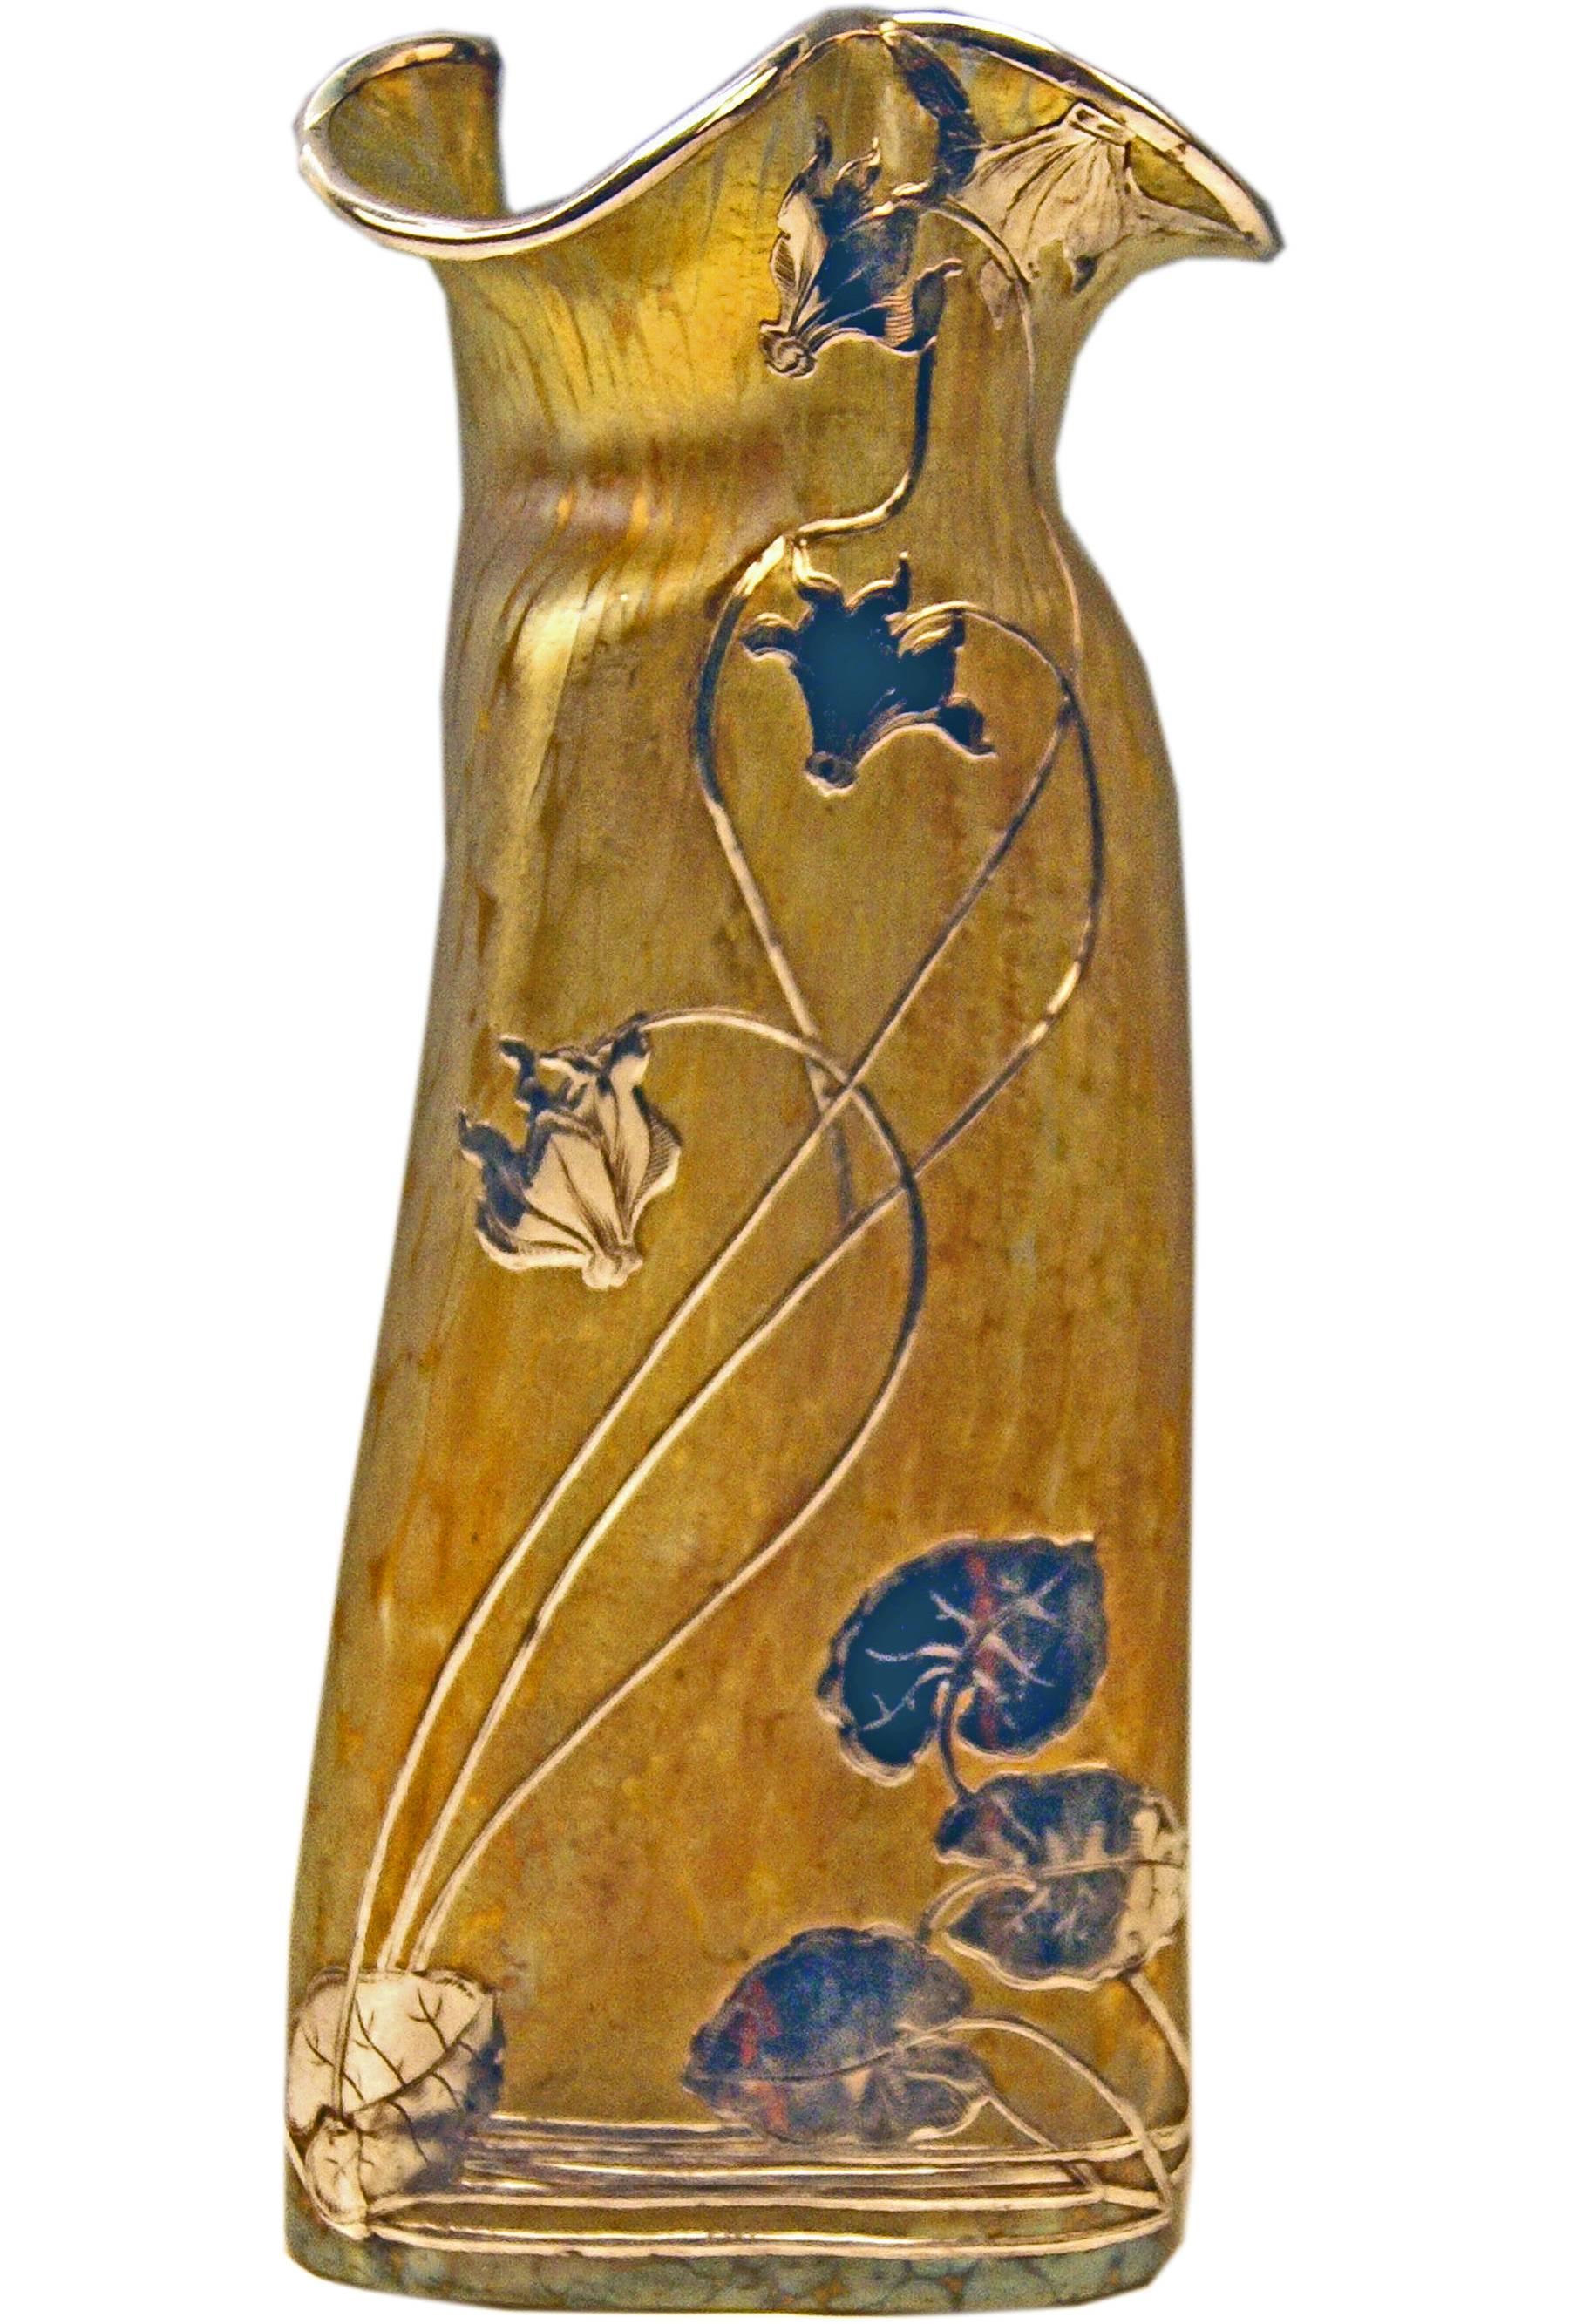 Made by Loetz, Klostermuehle (Bohemia) / circa 1900.
Decor: Candia Papillon 
(= colorless casing glass decorated with stunning iridescent golden-yellow spots and finest silver overlay).

Detailed description:
Vase Loetz (Lötz) Widow